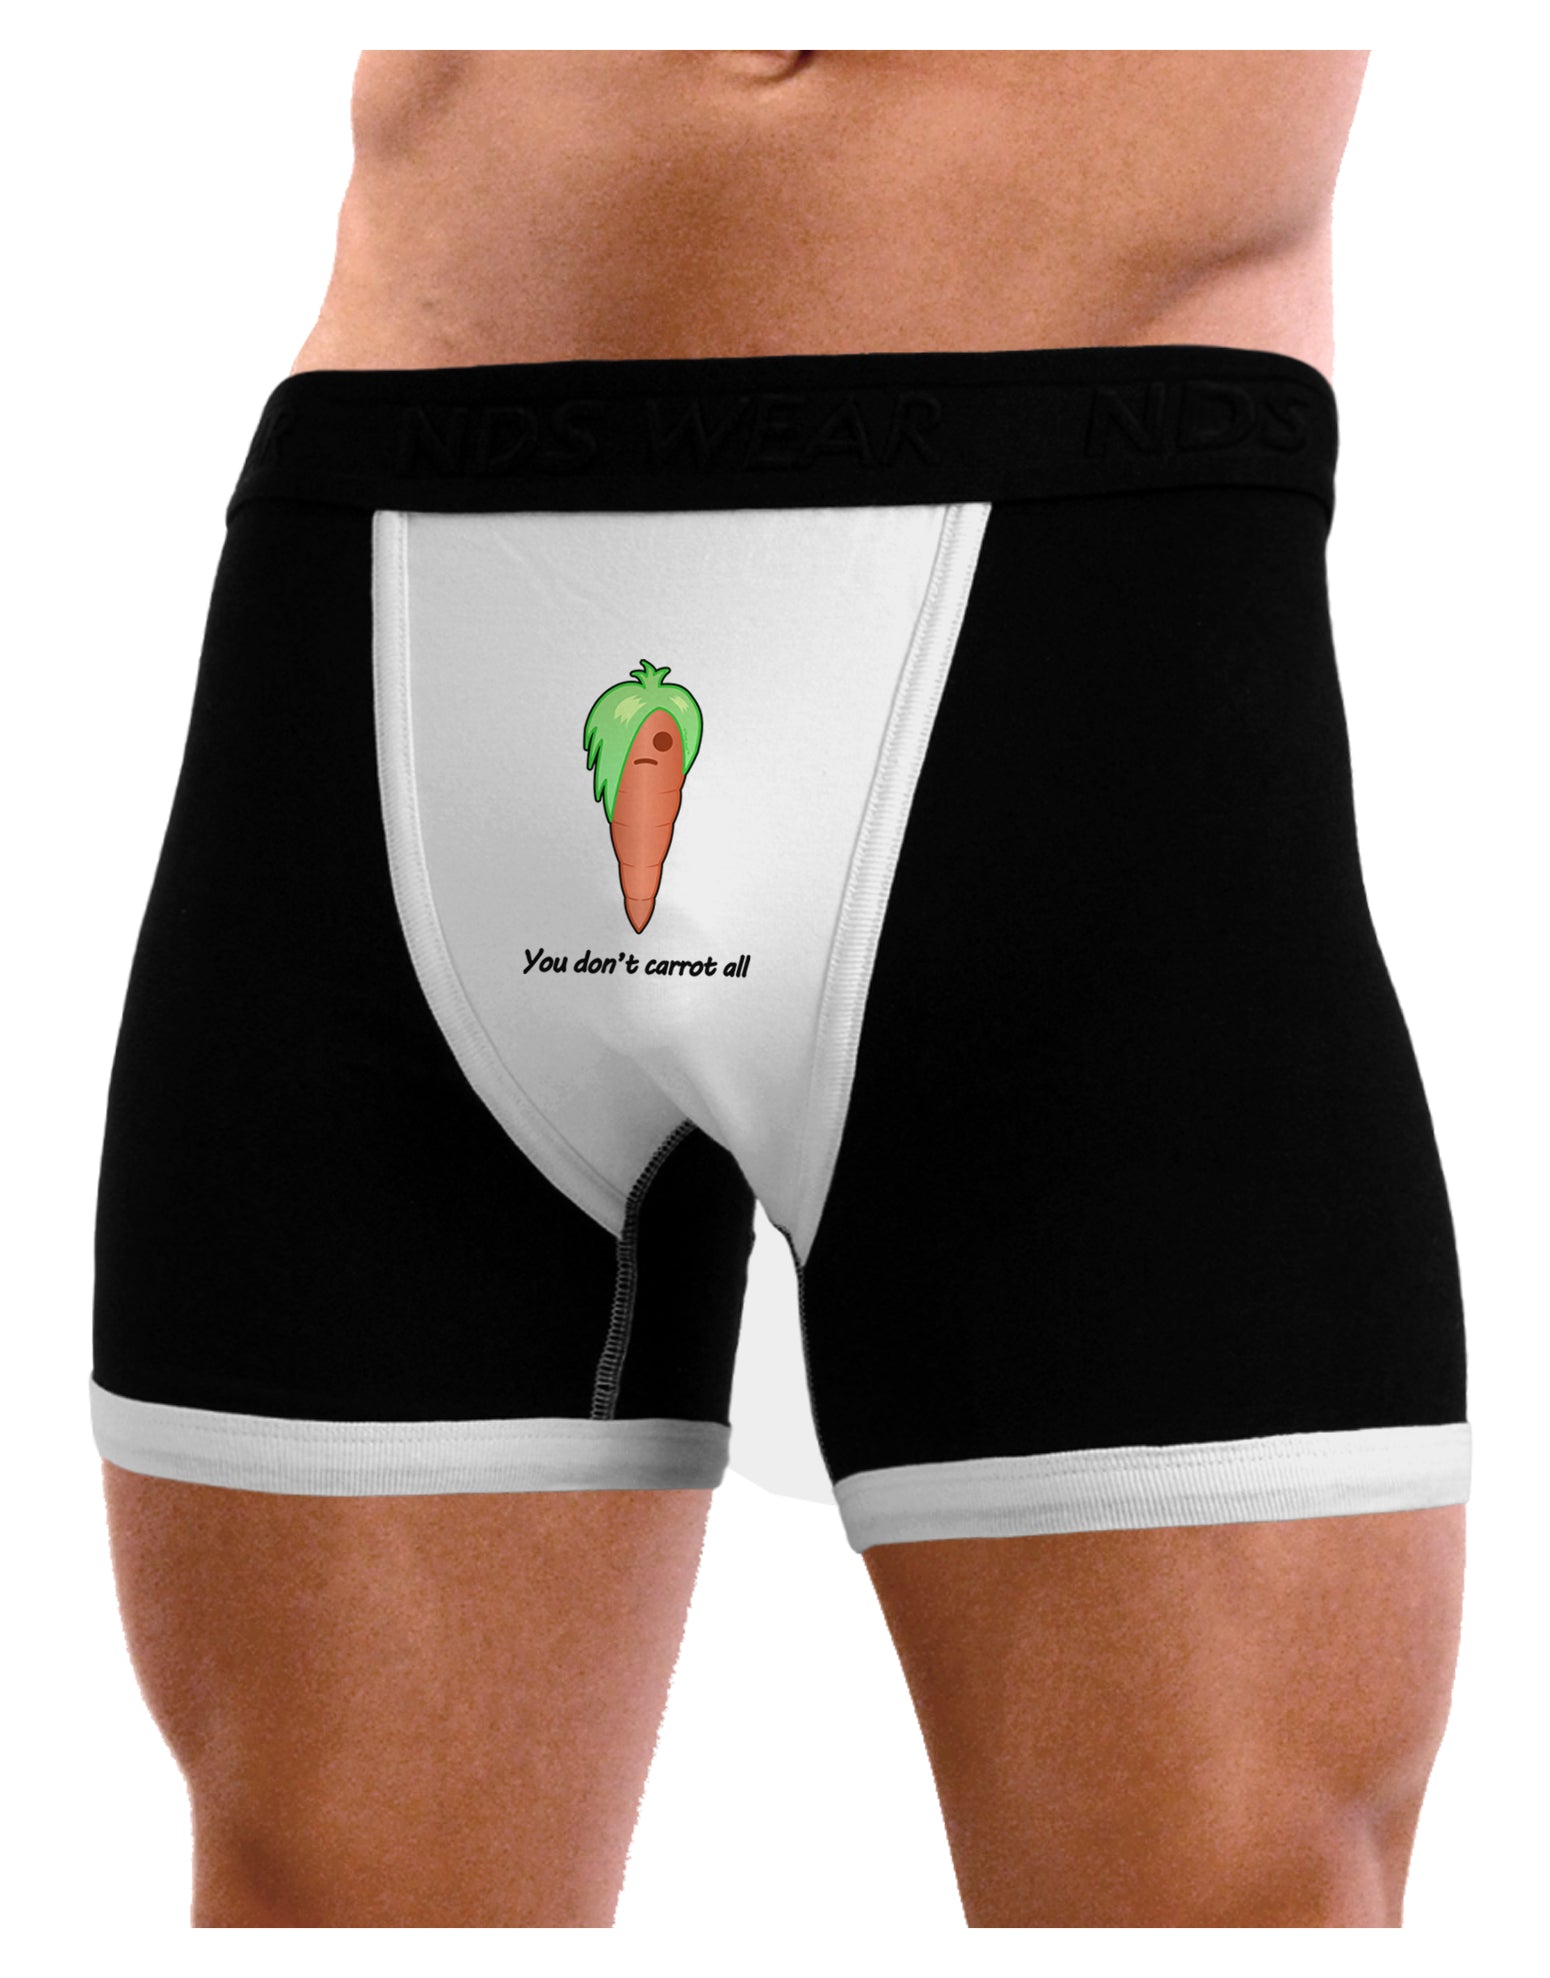 Carrot - You Don't Carrot All Mens NDS Wear Boxer Brief Underwear